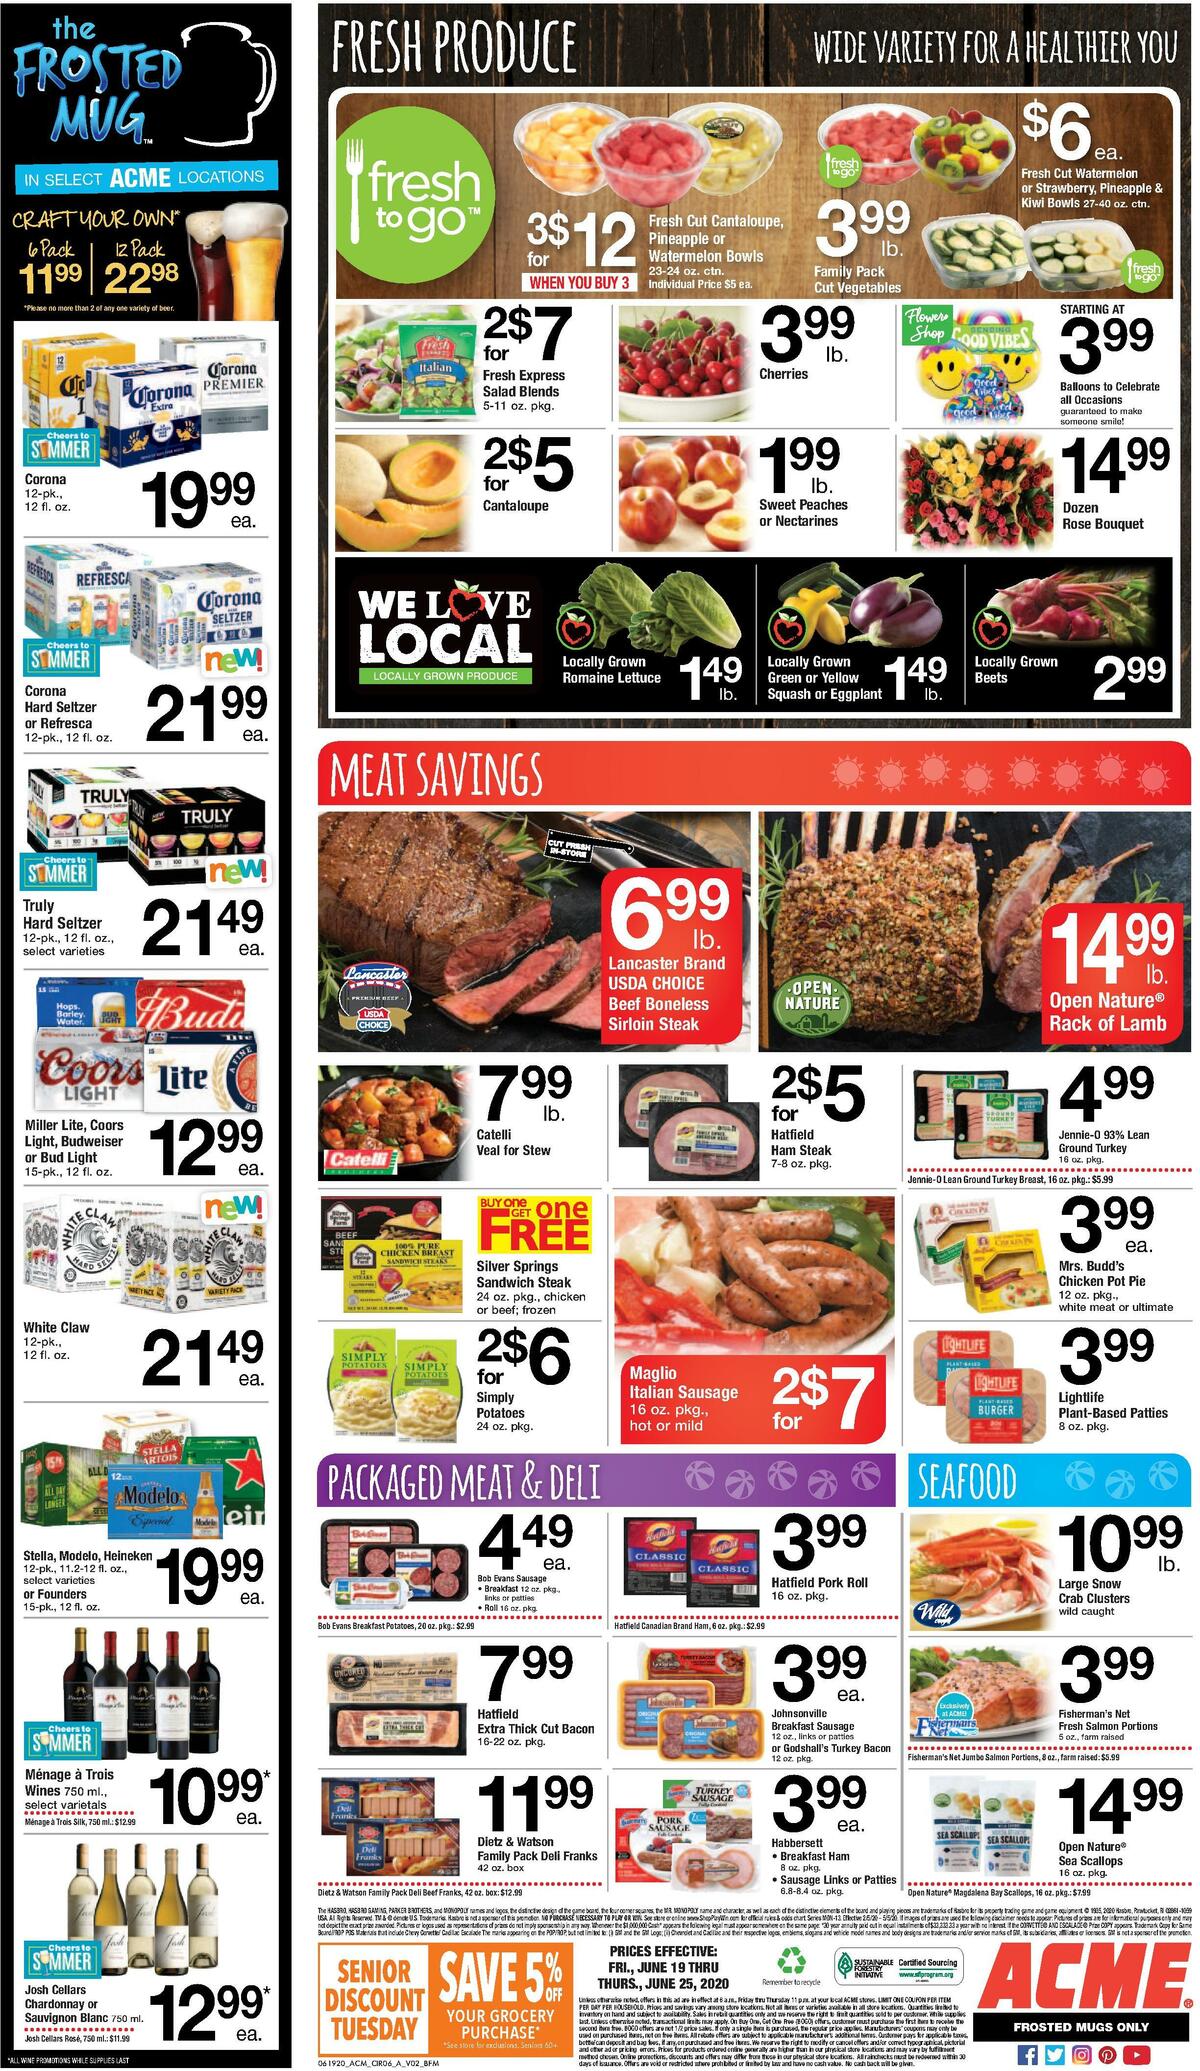 ACME Markets Weekly Ad from June 19